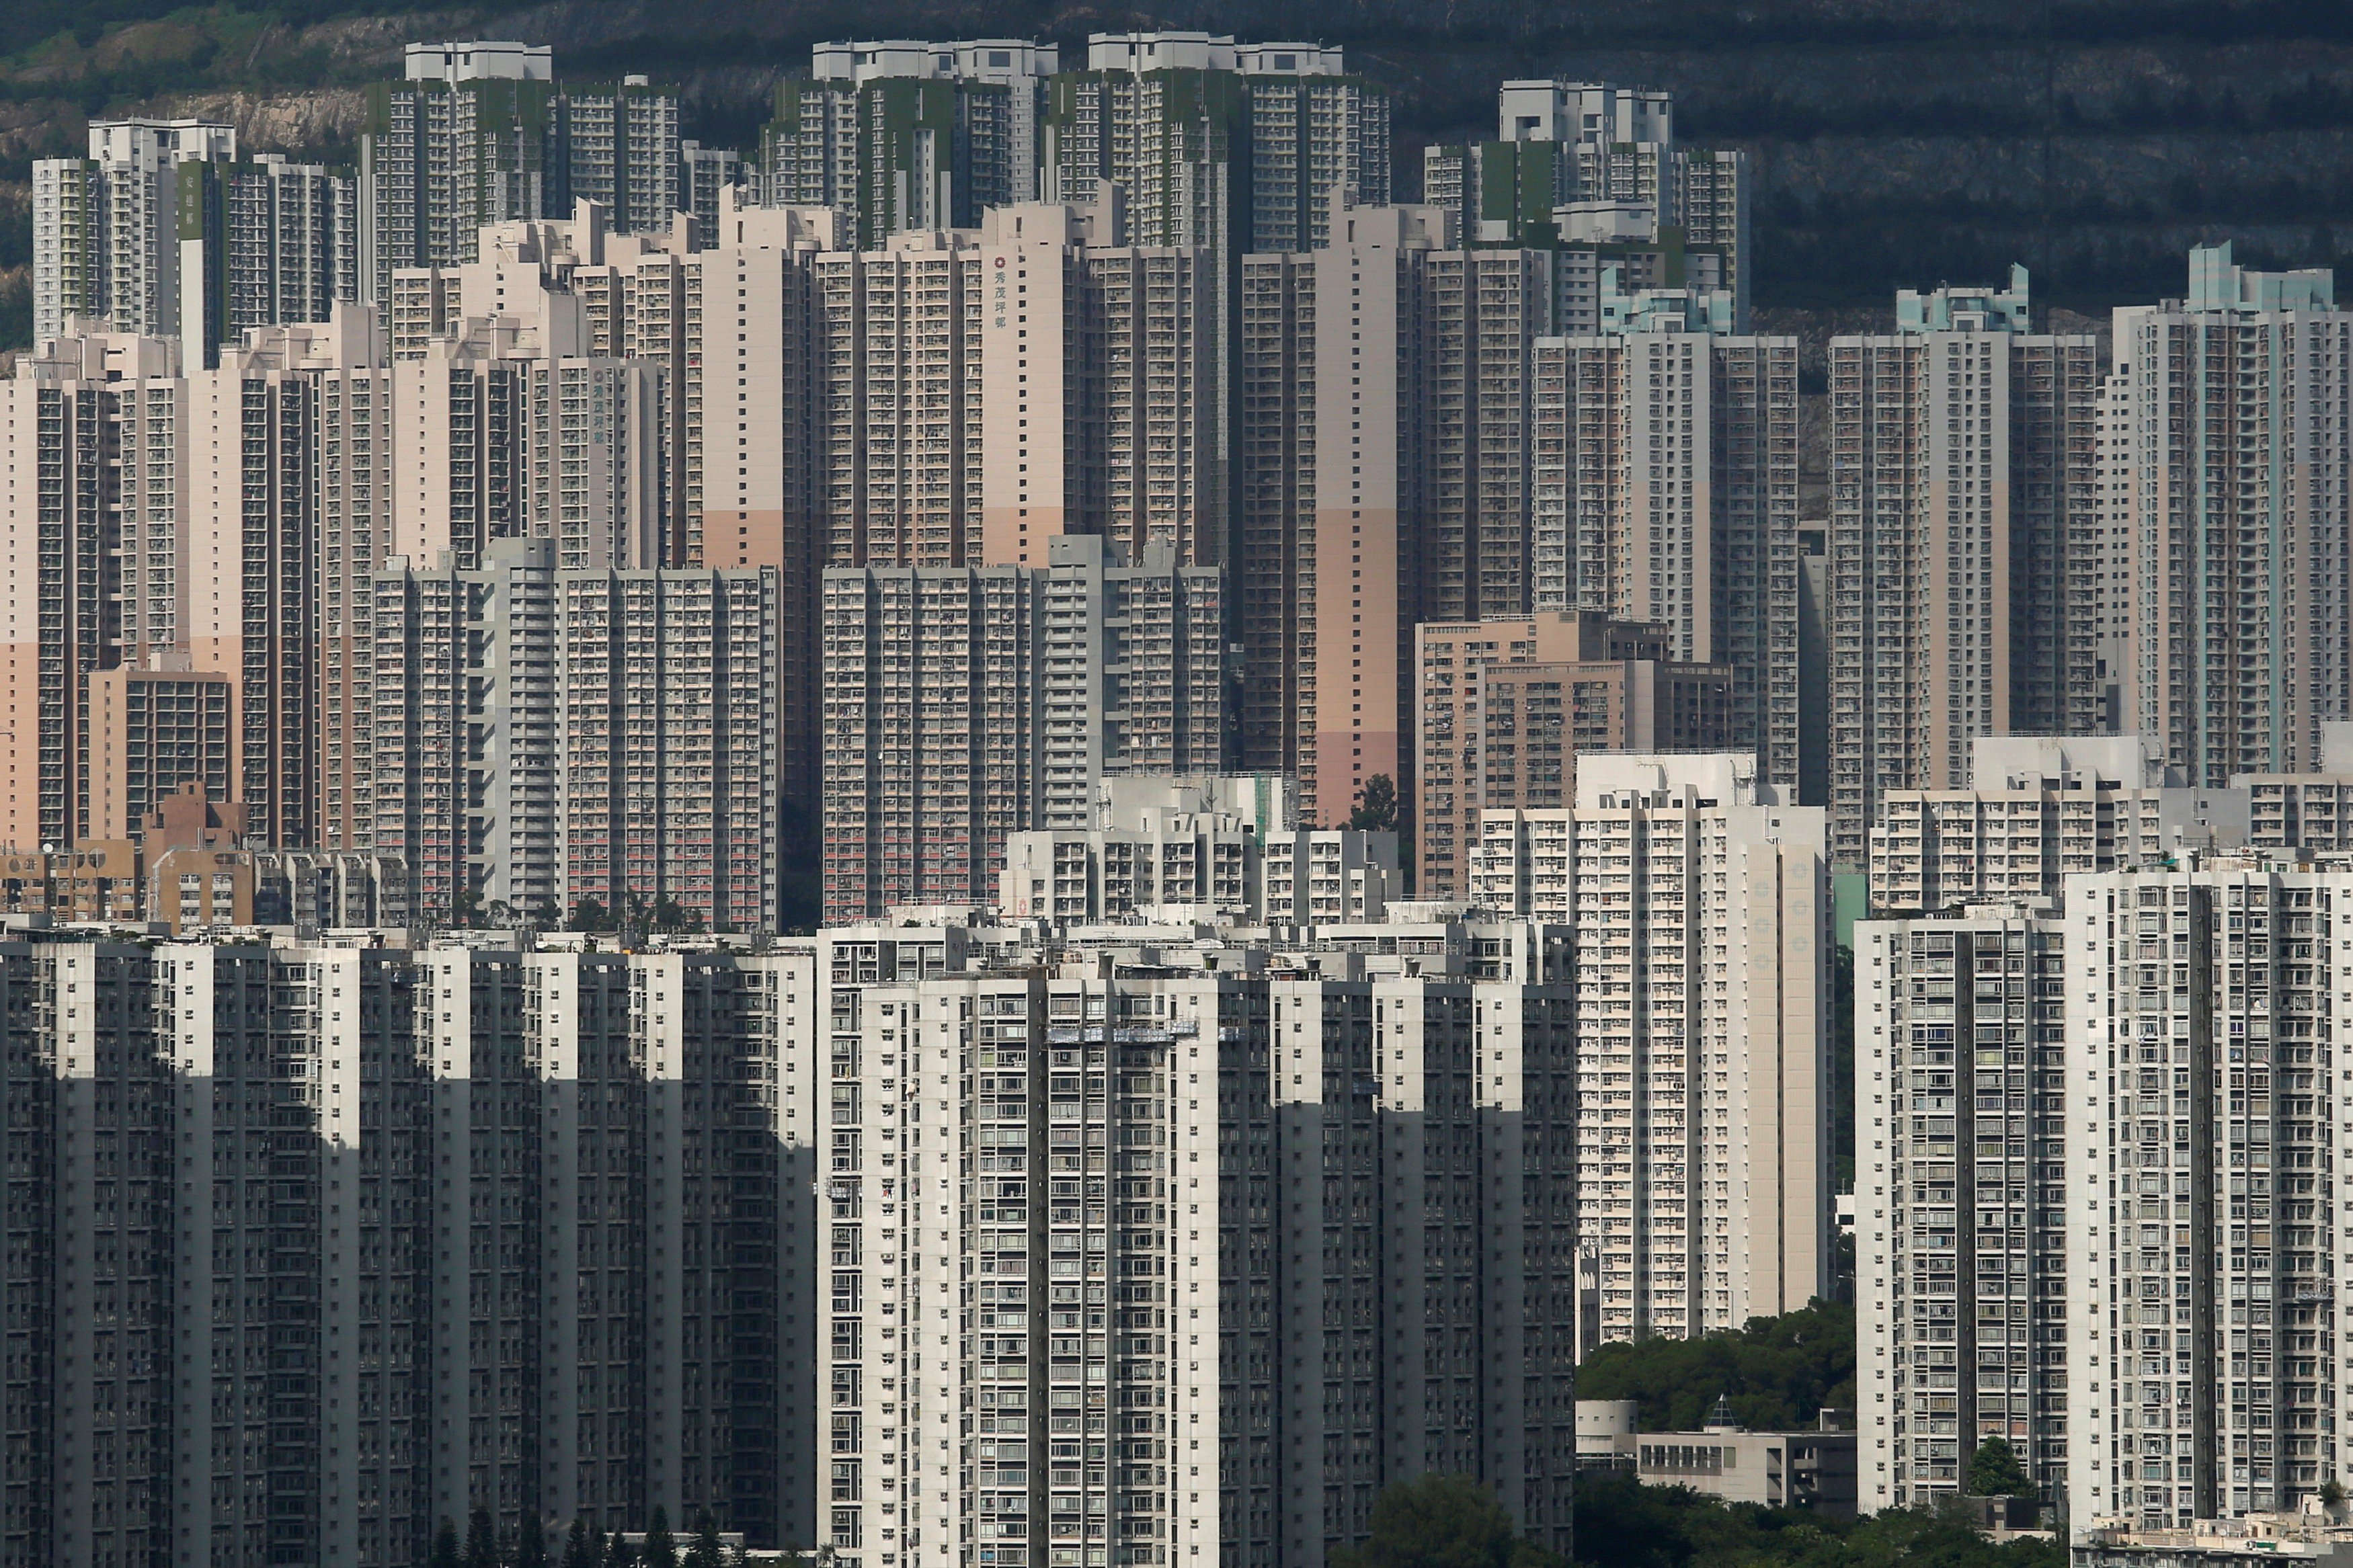 The Federation of Public Housing Estates says the new scheme will improve living standards of Hong Kong’s low-income people by giving them more accommodation choices. Photo: Handout